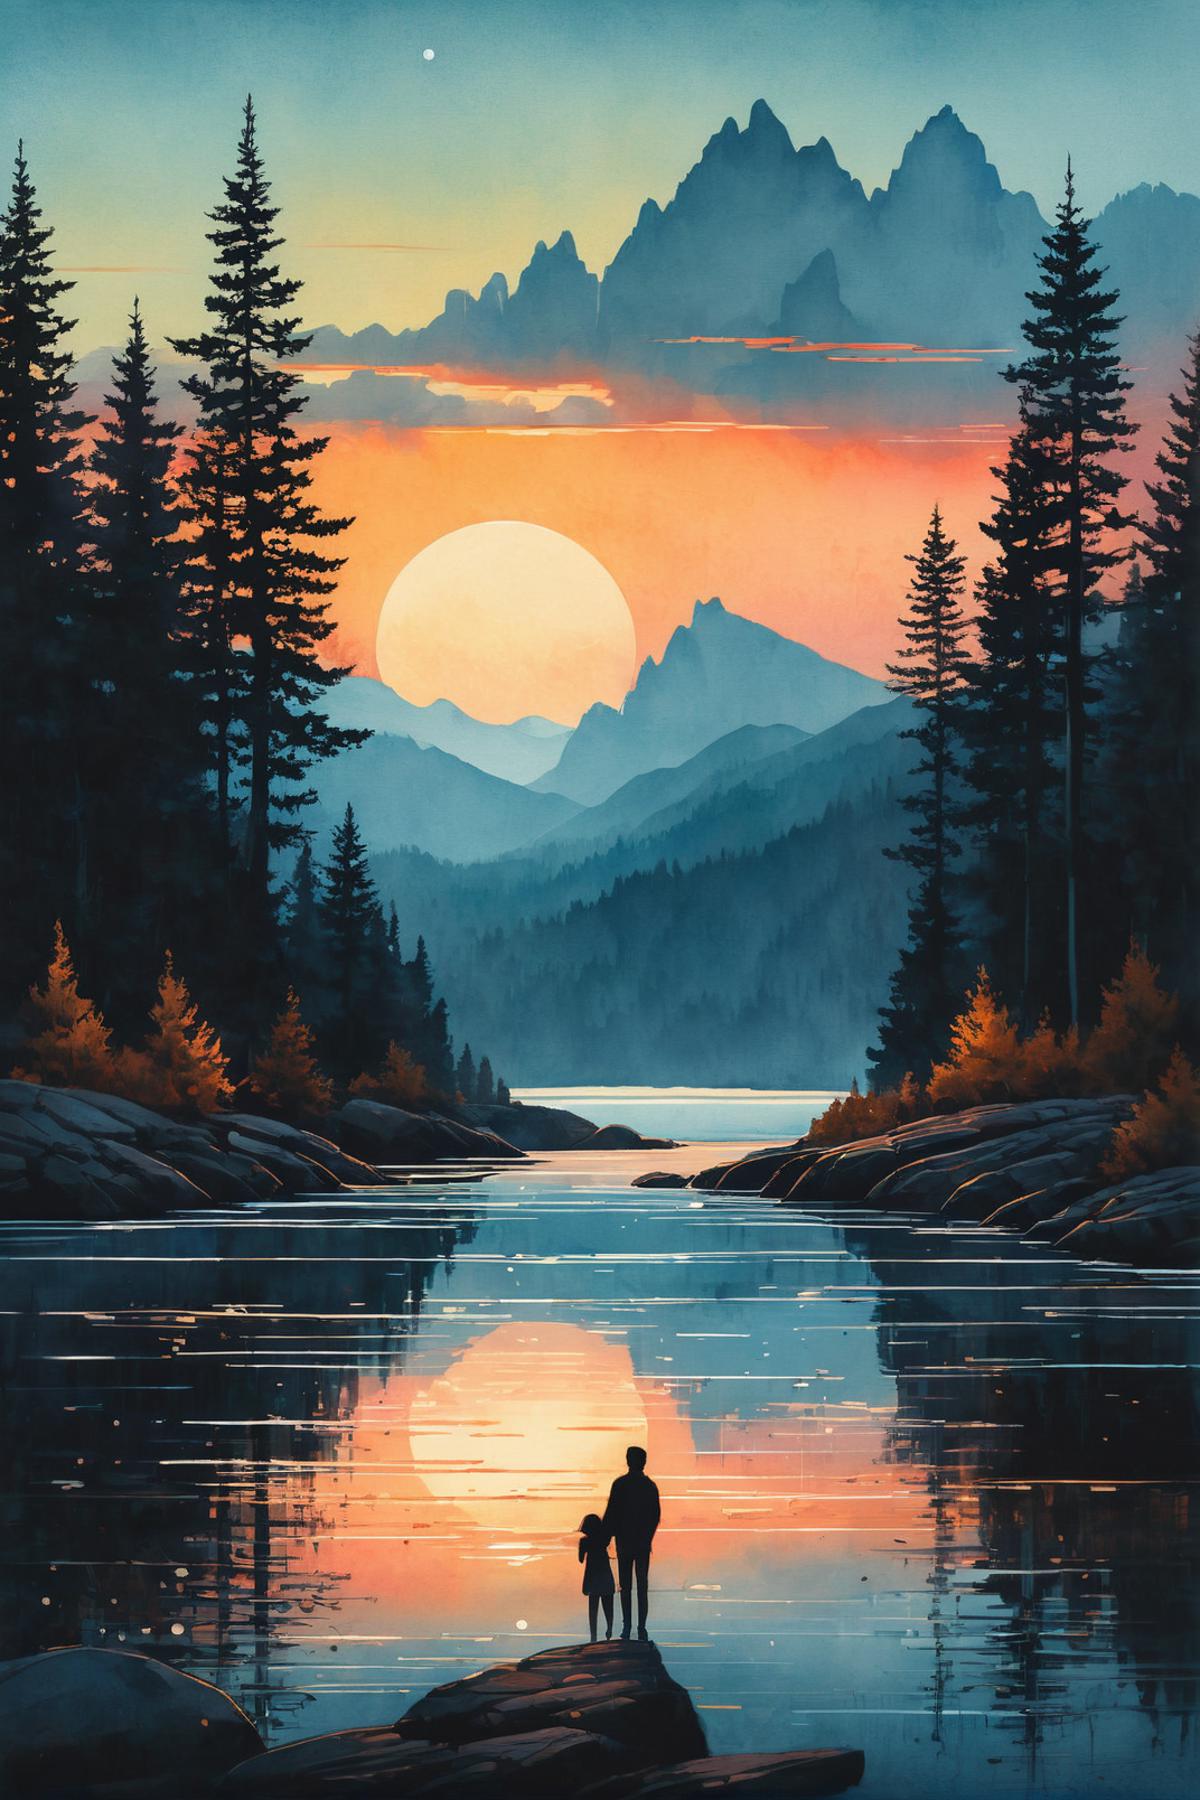 A person standing by a river under a sunset with mountains in the background.